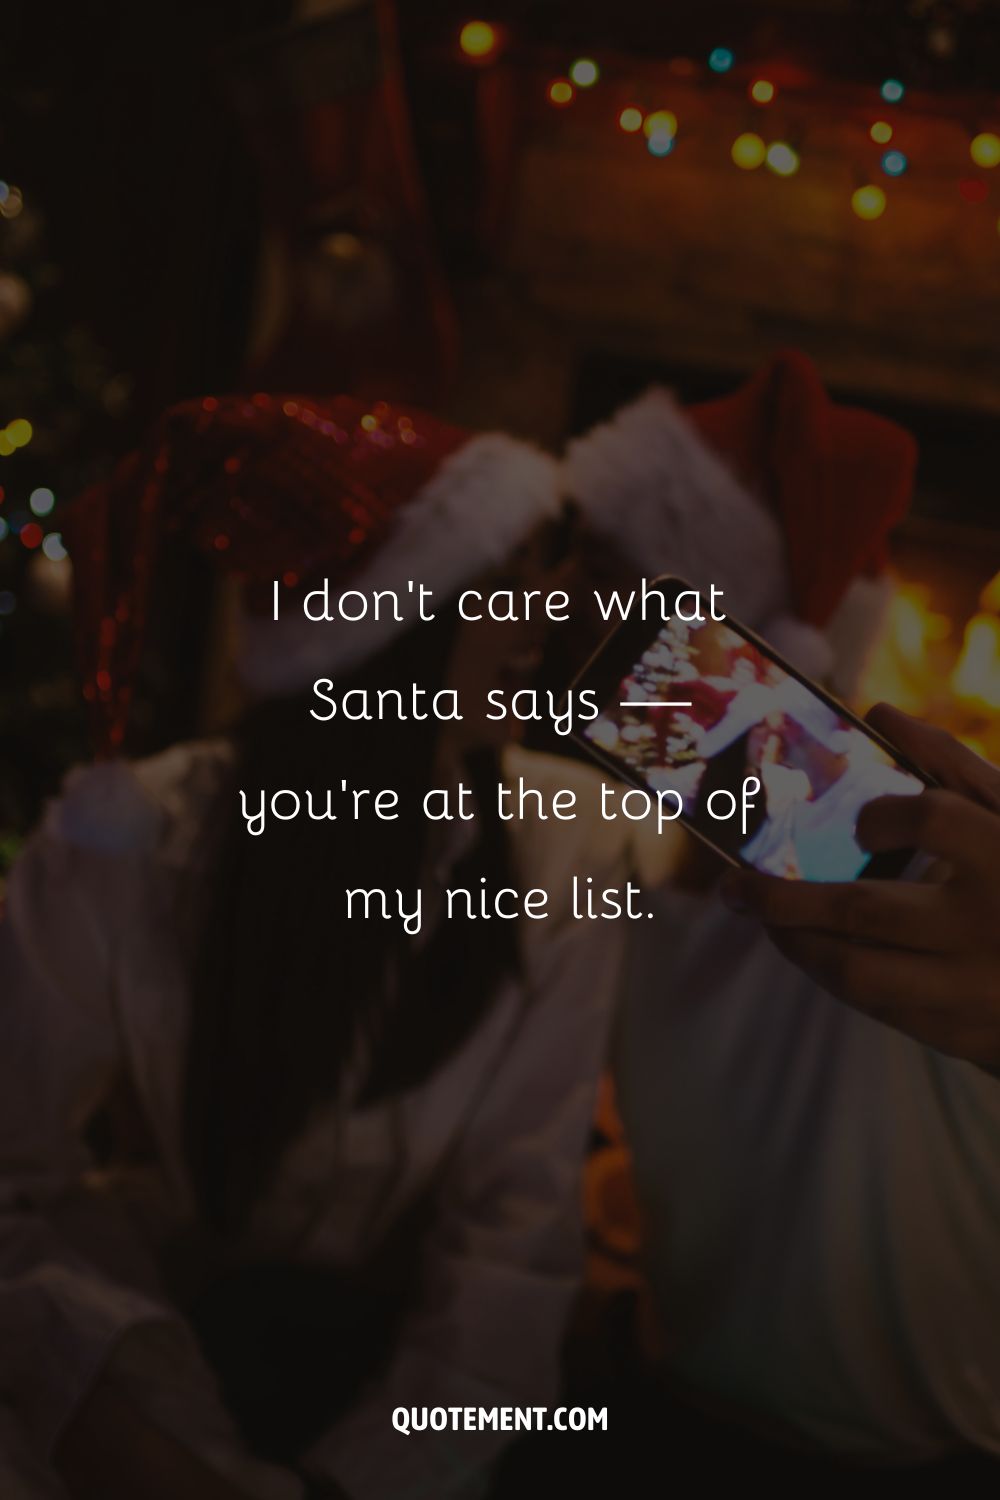 A person taking a photo of a smiling couple in Santa's hats representing an irresistible